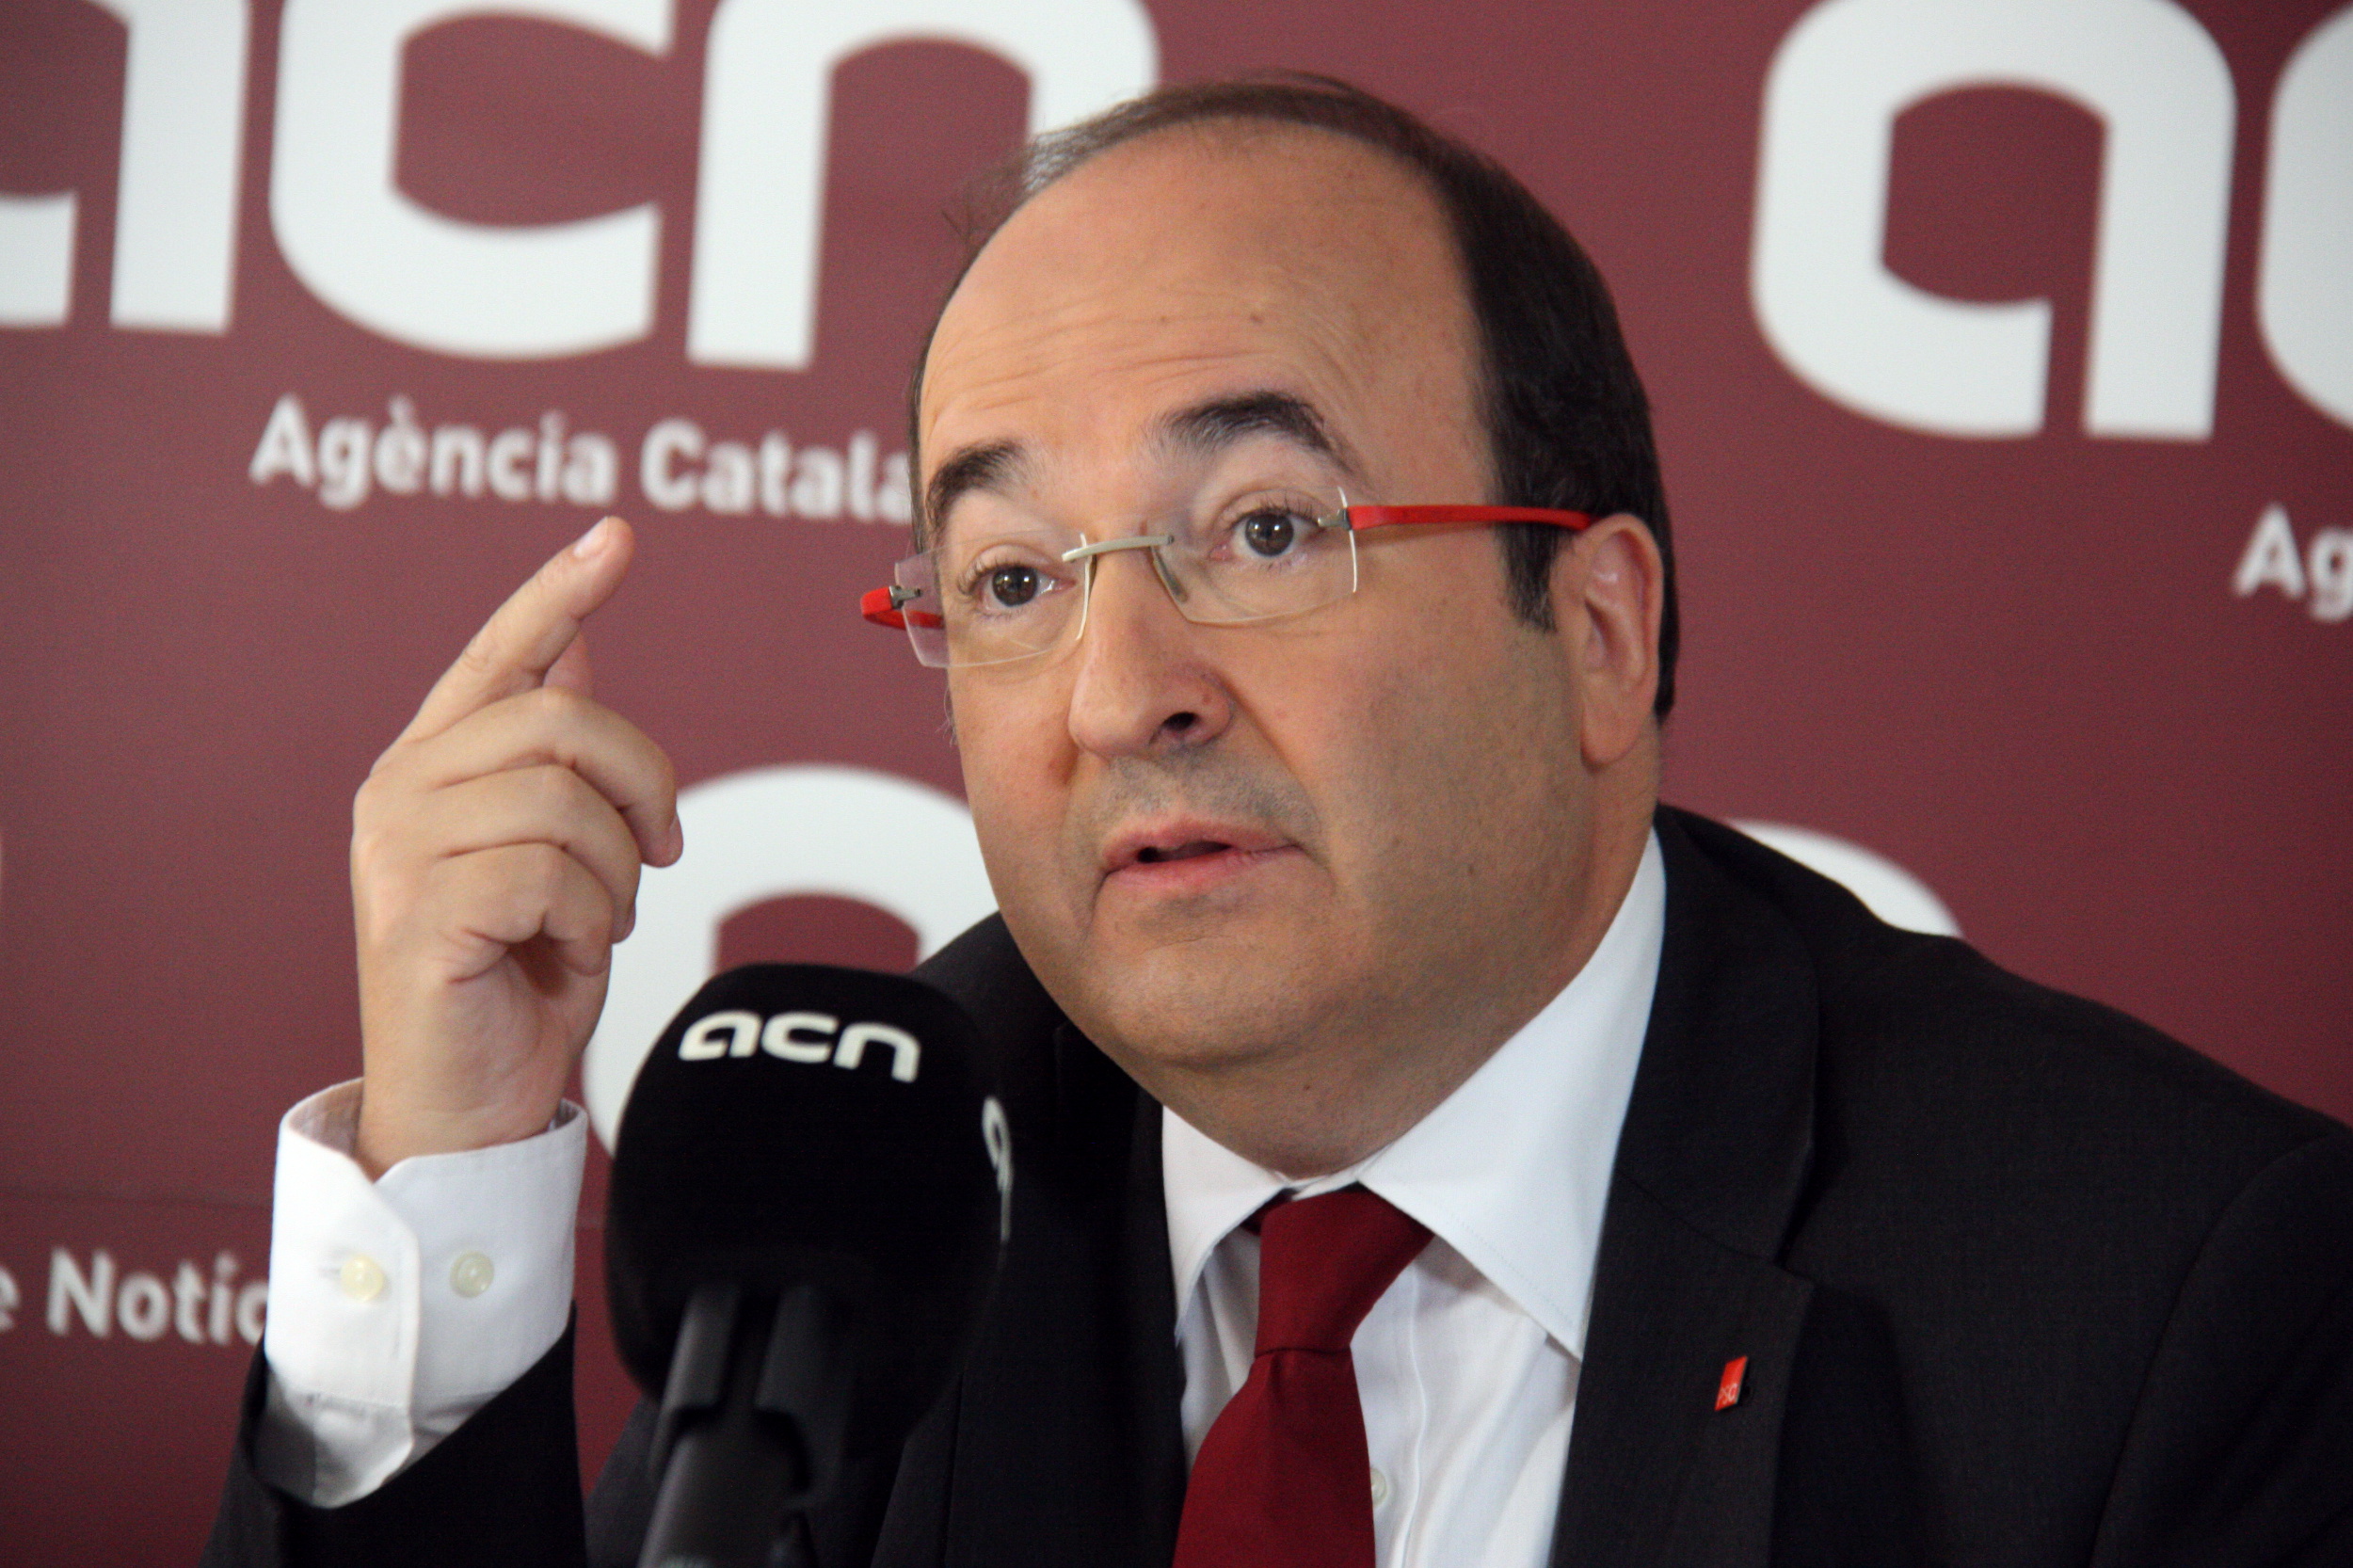 Catalan Socialist party PSC’s candidate, Miquel Iceta's press conference at CNA headquarters